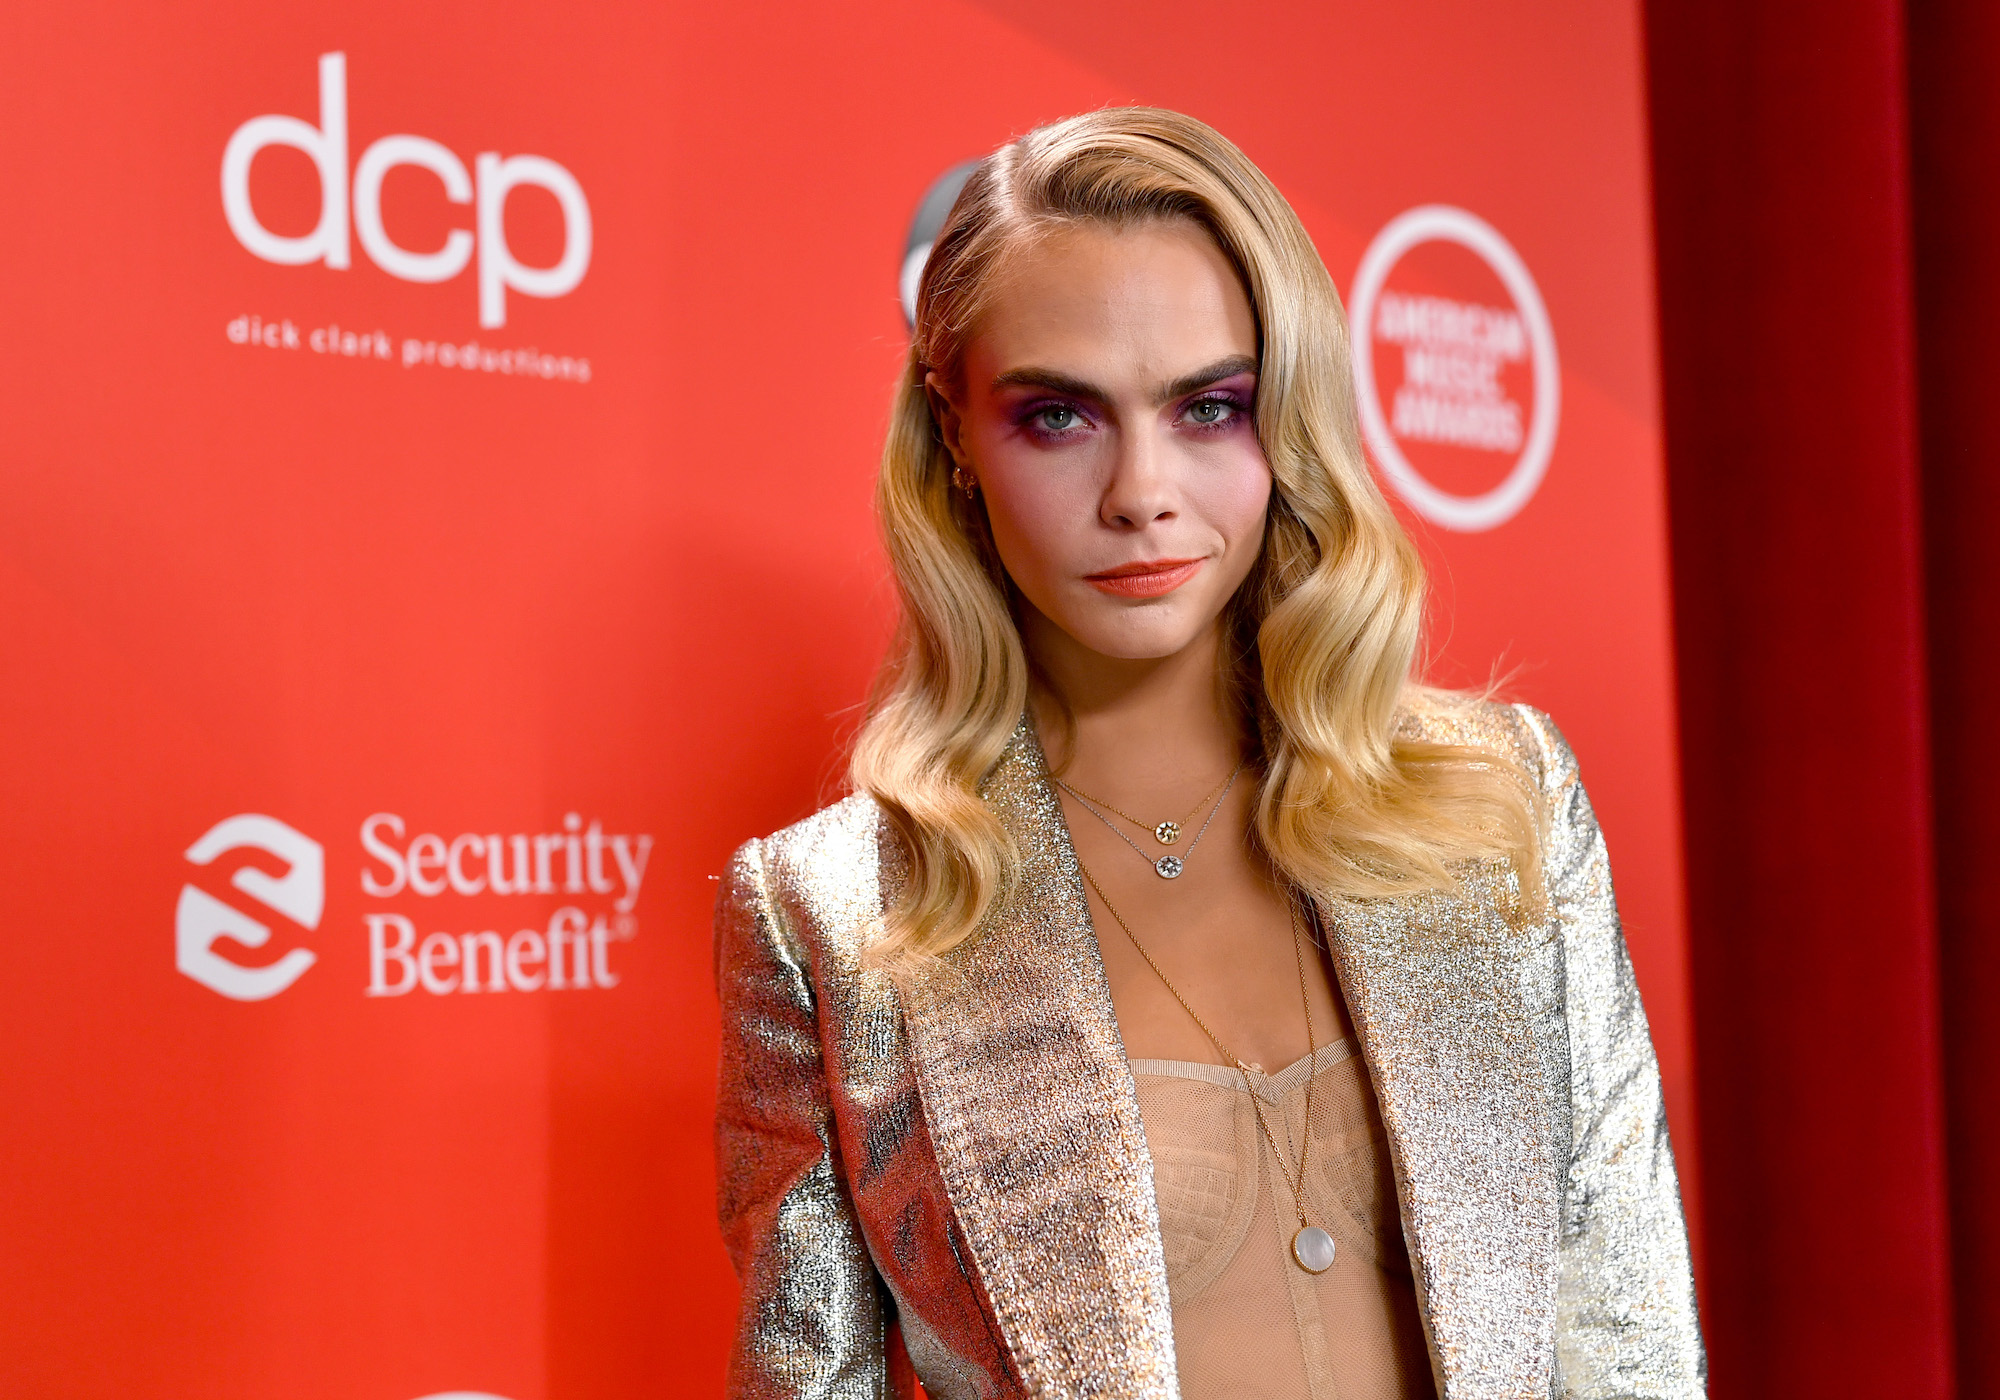 Cara Delevingne Shares Why She Decided Not to Get Plastic Surgery